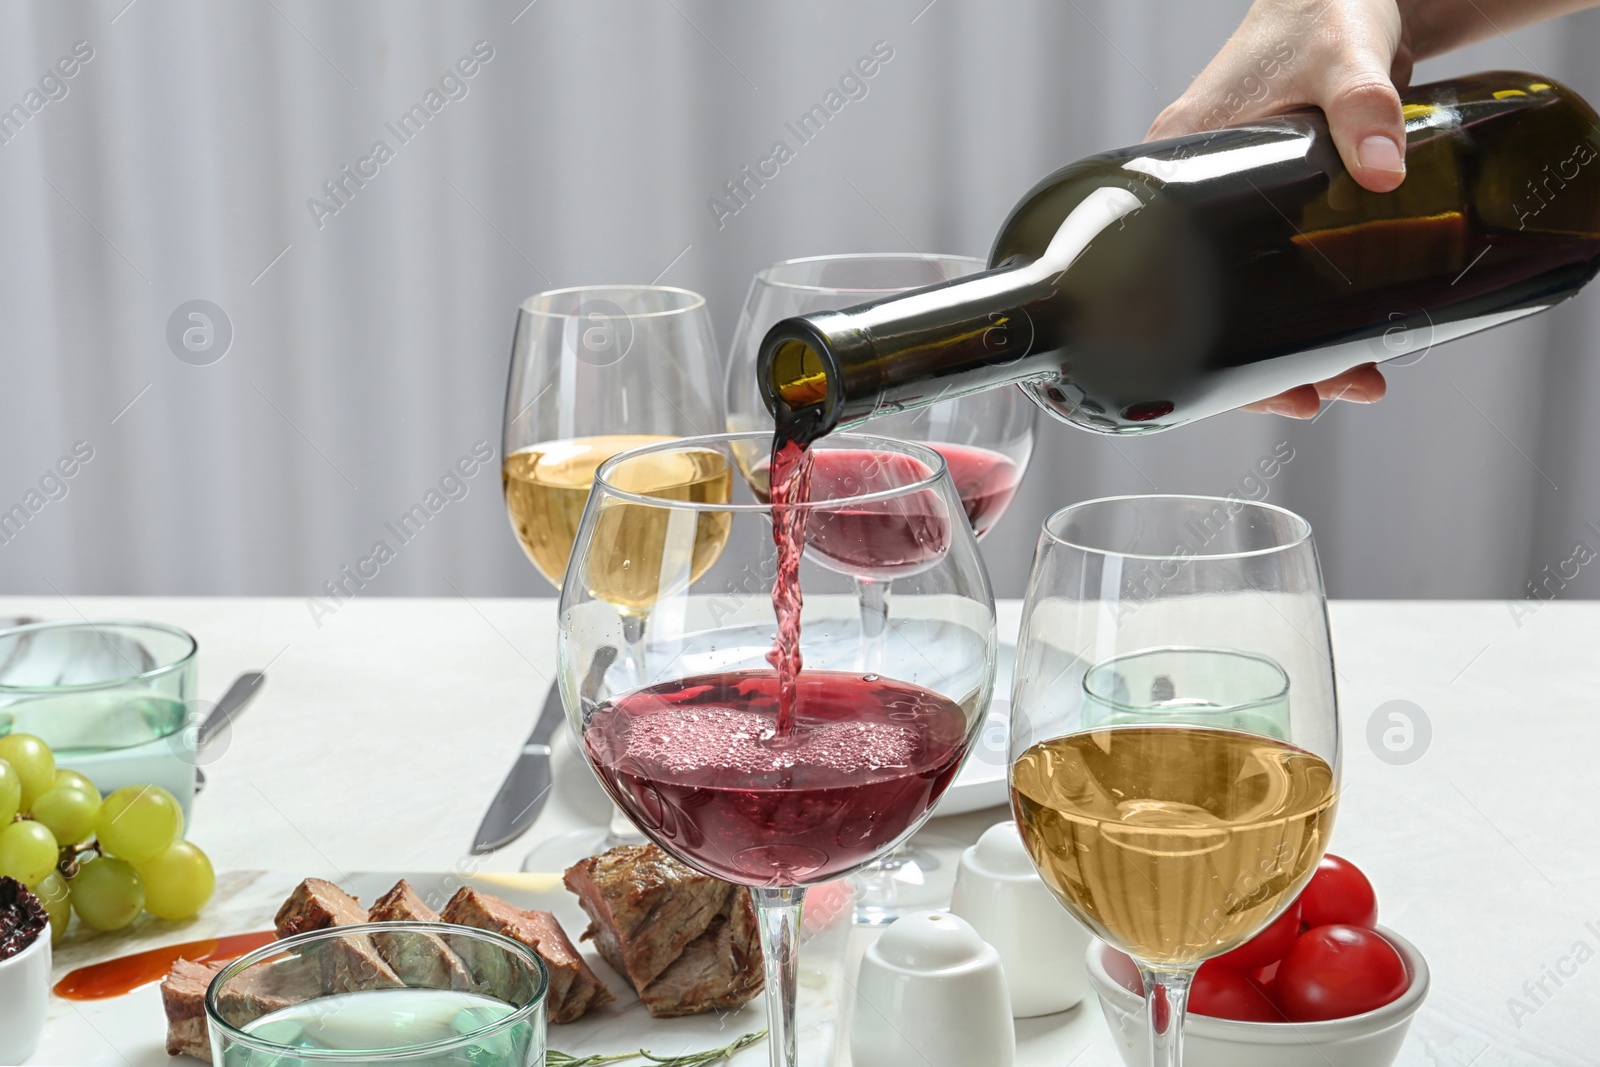 Photo of Woman pouring red wine into glass on served table